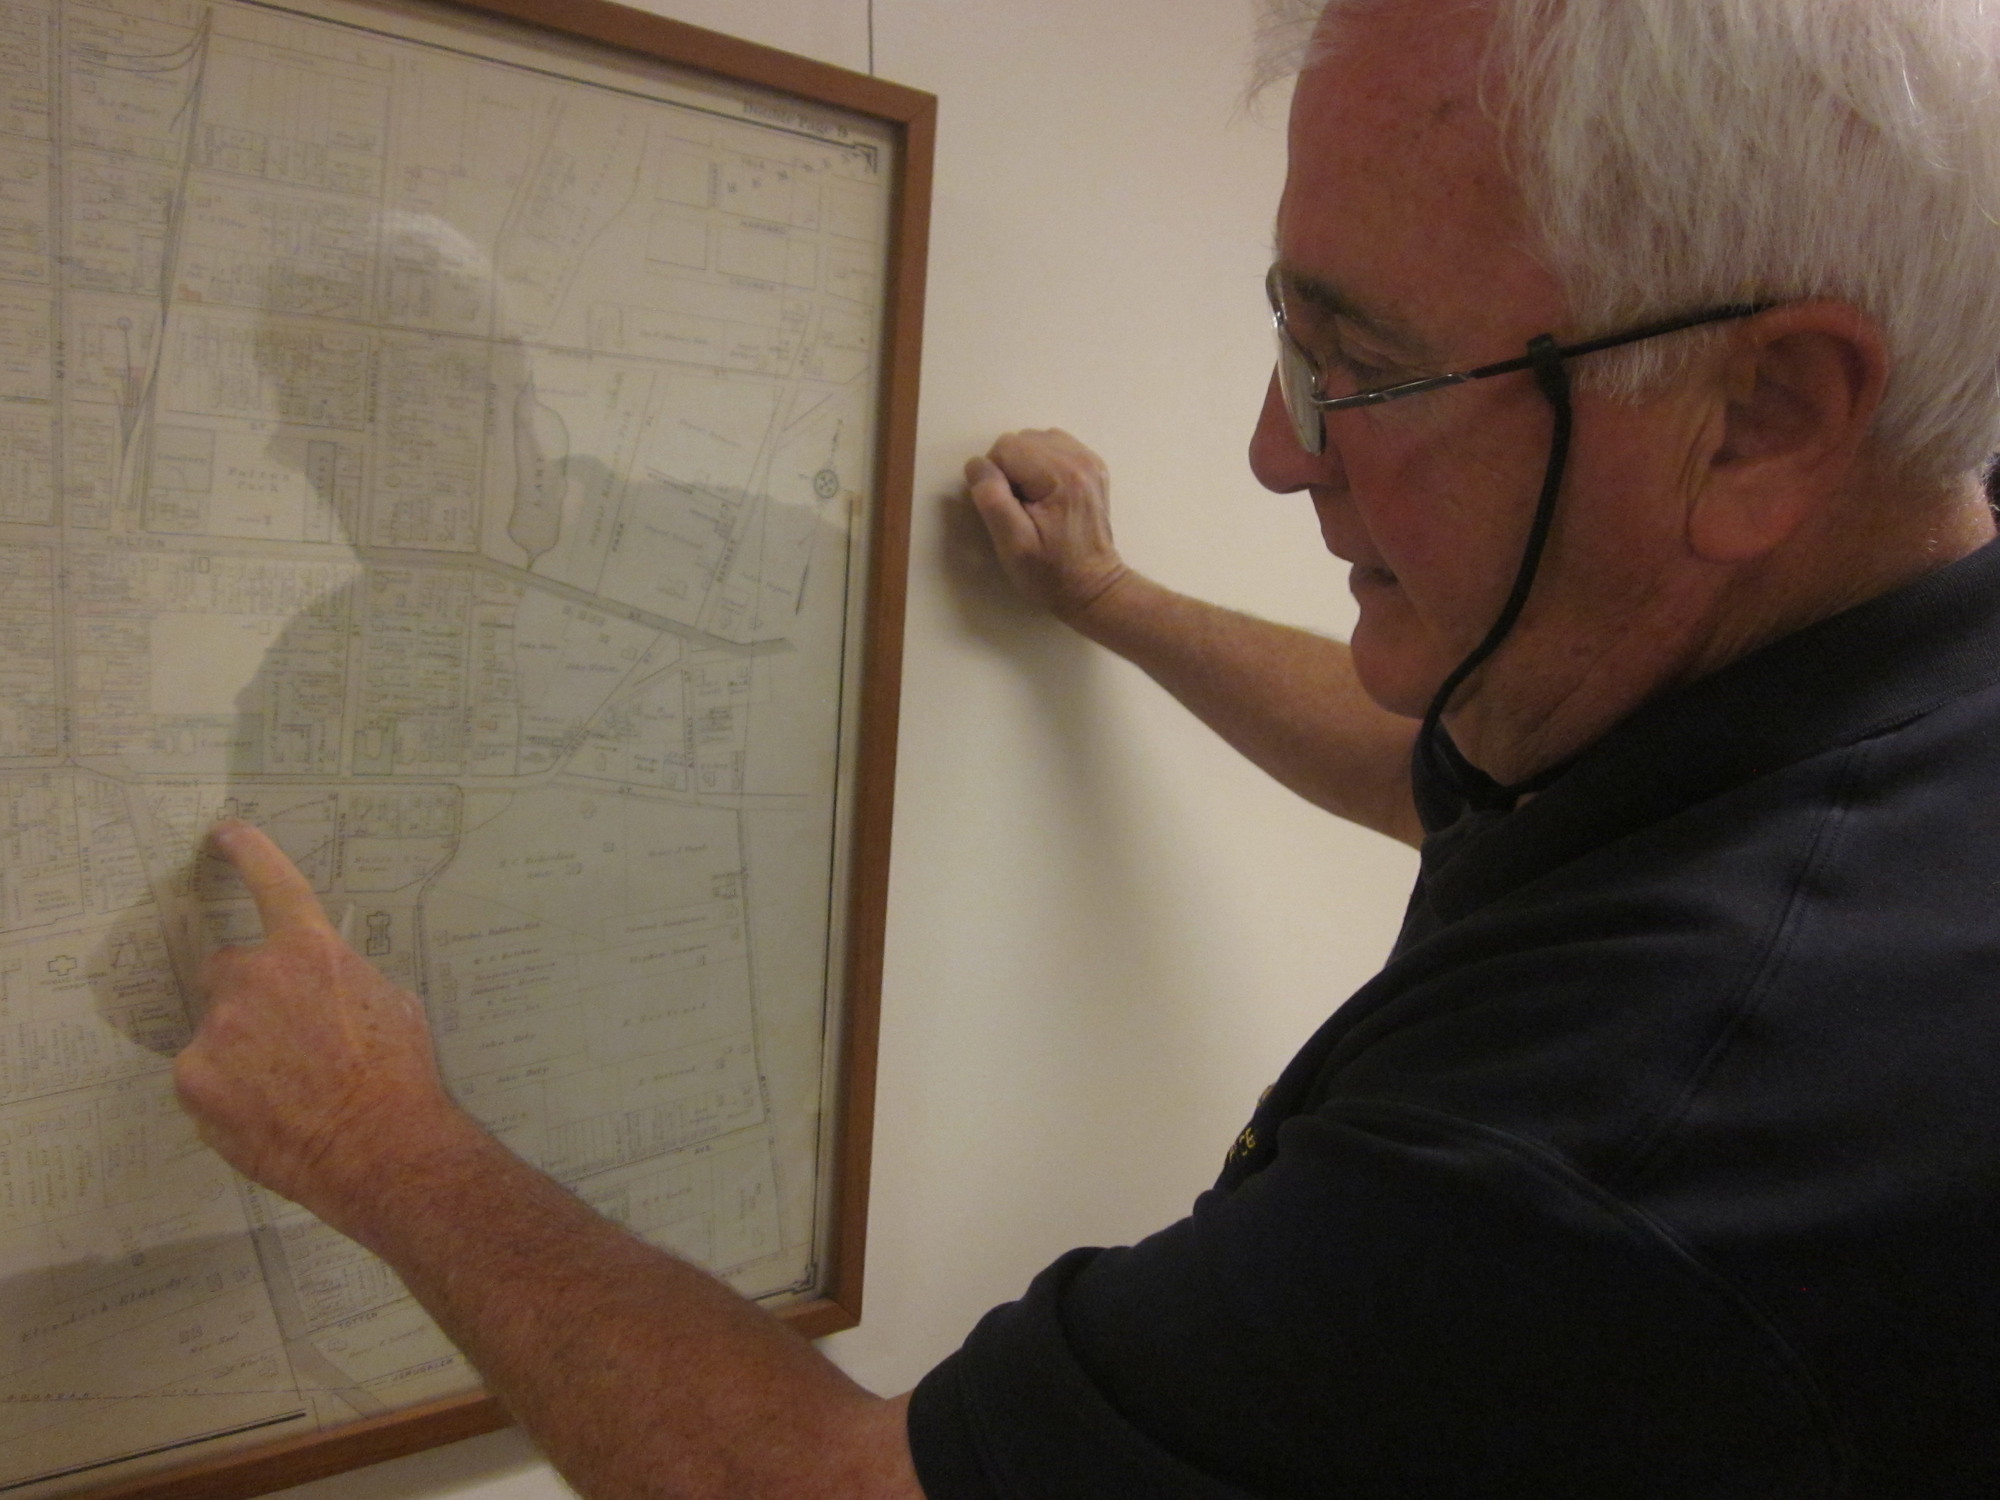 Thomas Saltzman explained the history of the Town of Hempstead’s many villages while pointing at the page of an E. Belcher Hyde atlas.